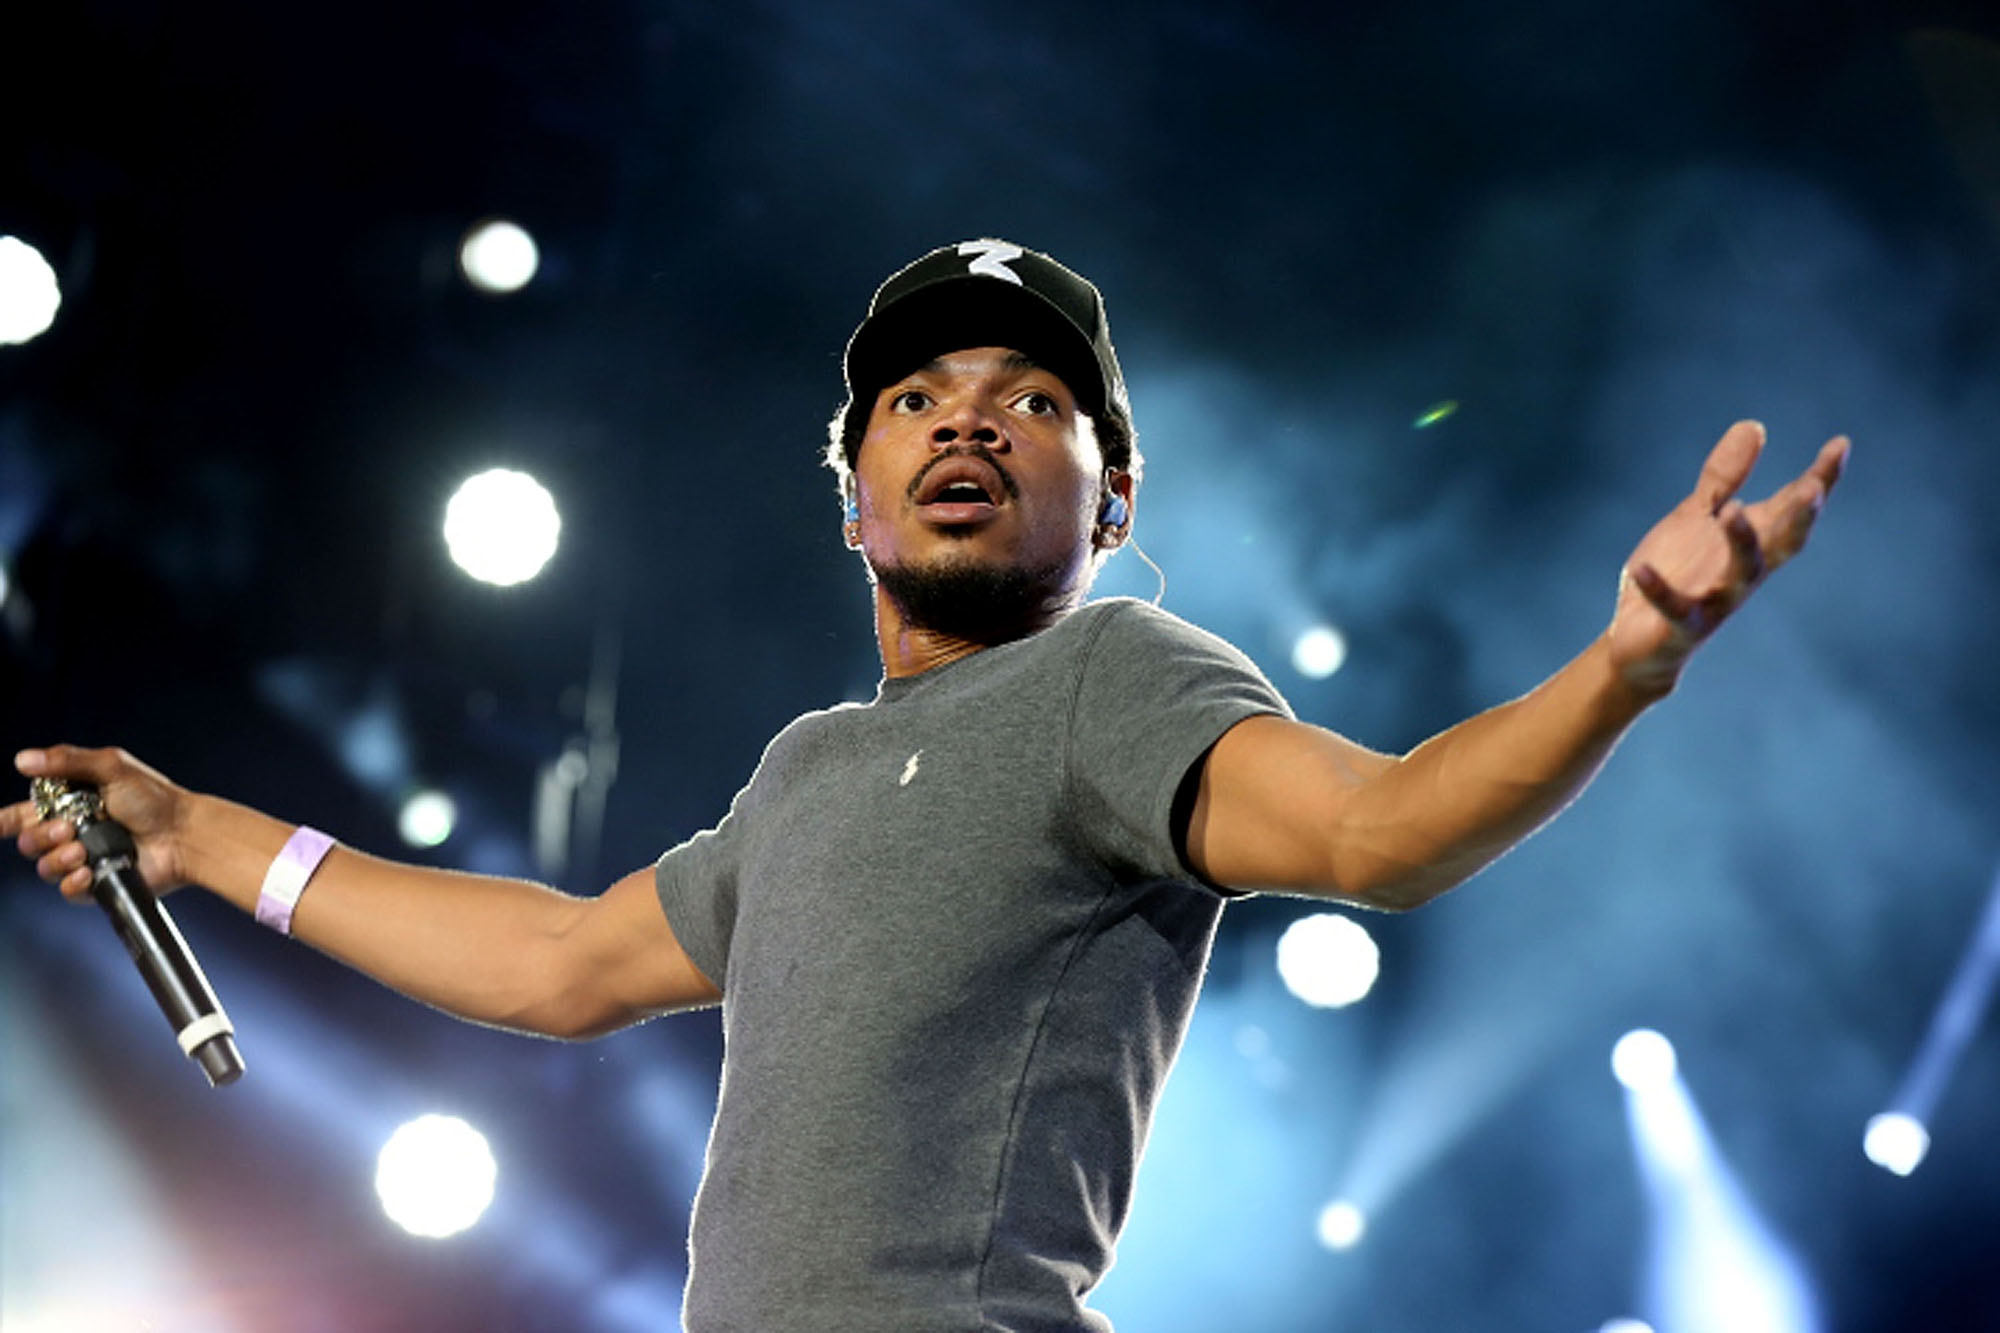 Chance the Rapper performs 2016 Made In America Festival - Day 2 on September 4, 2016 in Philadelphia, Pennsylvania.  (Photo by Shareif Ziyadat/WireImage) (Shareif Ziyadat&mdash;WireImage)